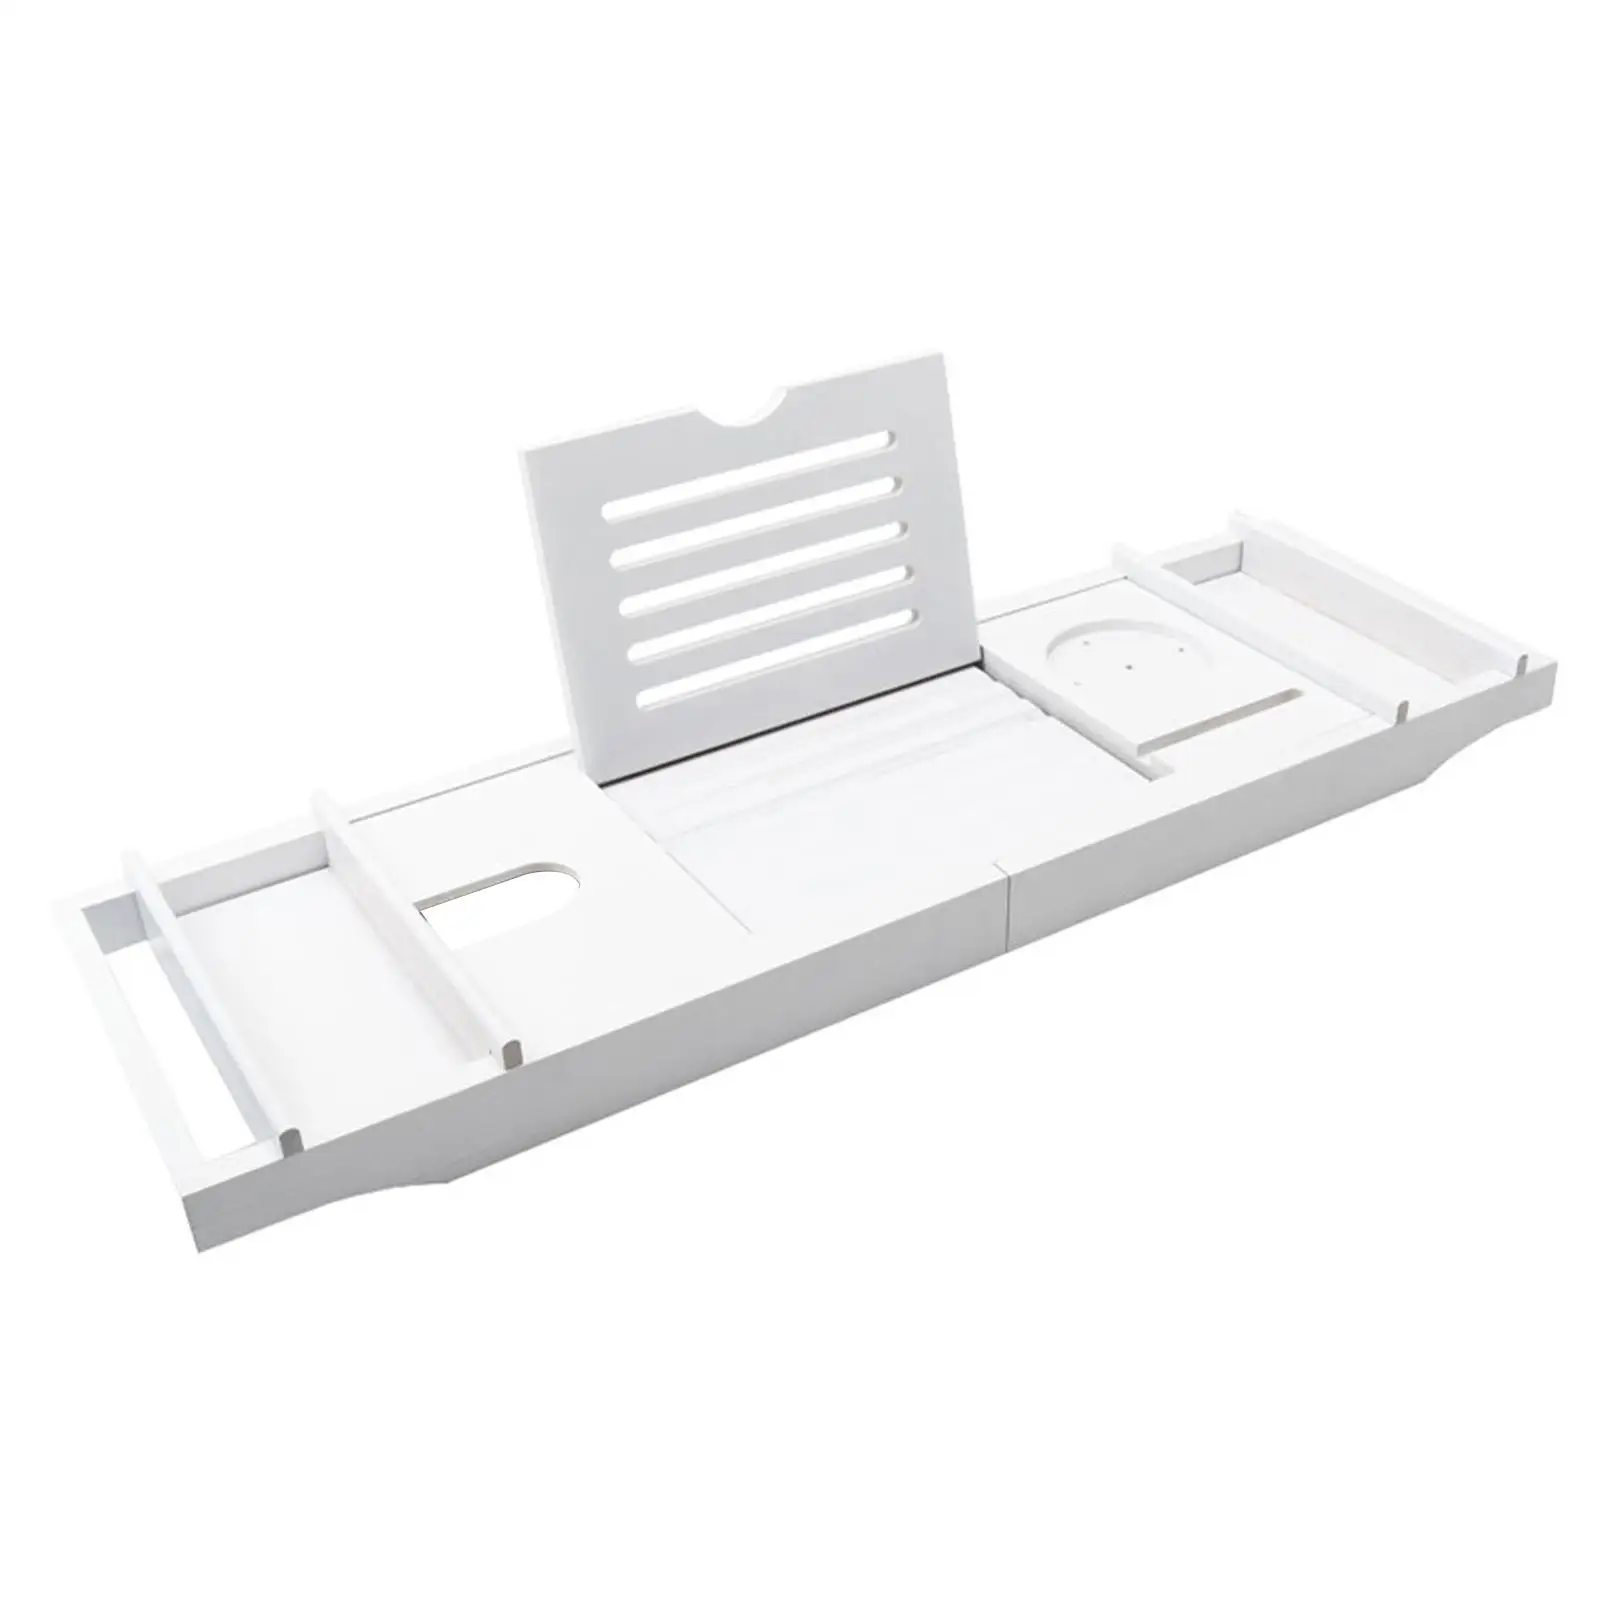 Expandable Tub Tray Bath Tub Tray Drinks Tray Holds Book, Phone, Drinks, Soap,